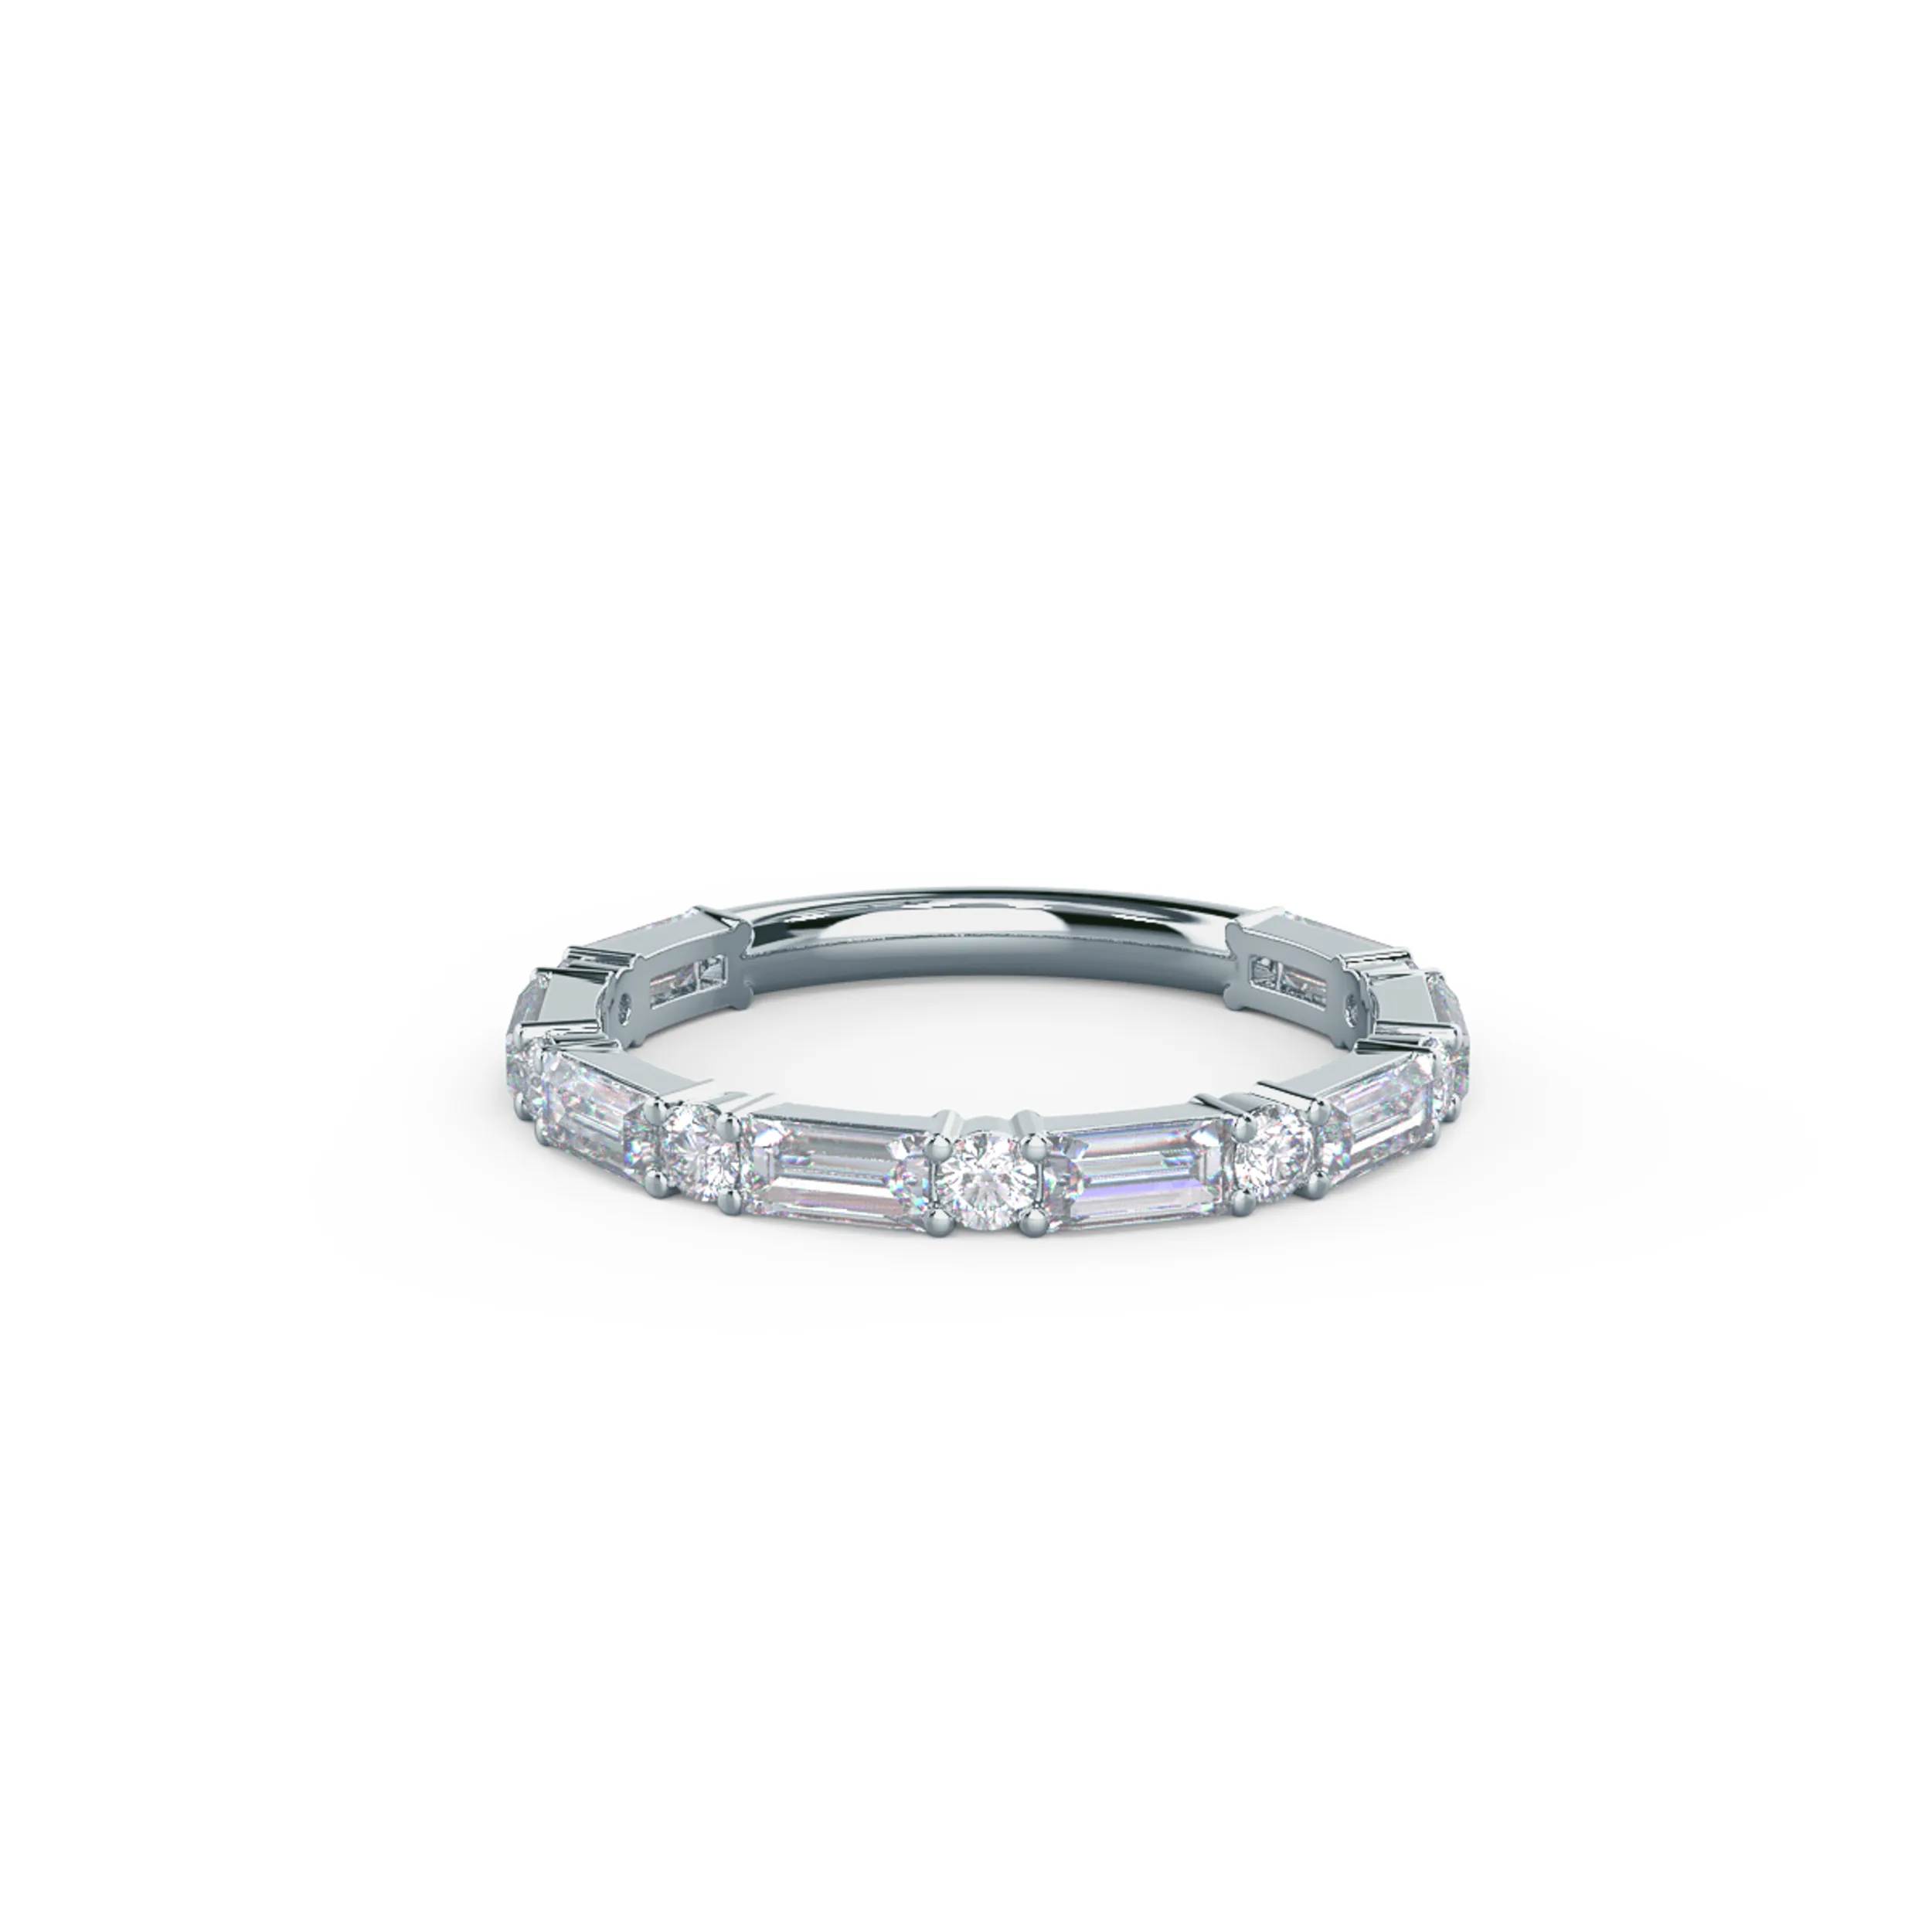 1.0 Carat Lab Diamonds set in 18k White Gold Baguette and Round Three Quarter Band (Main View)